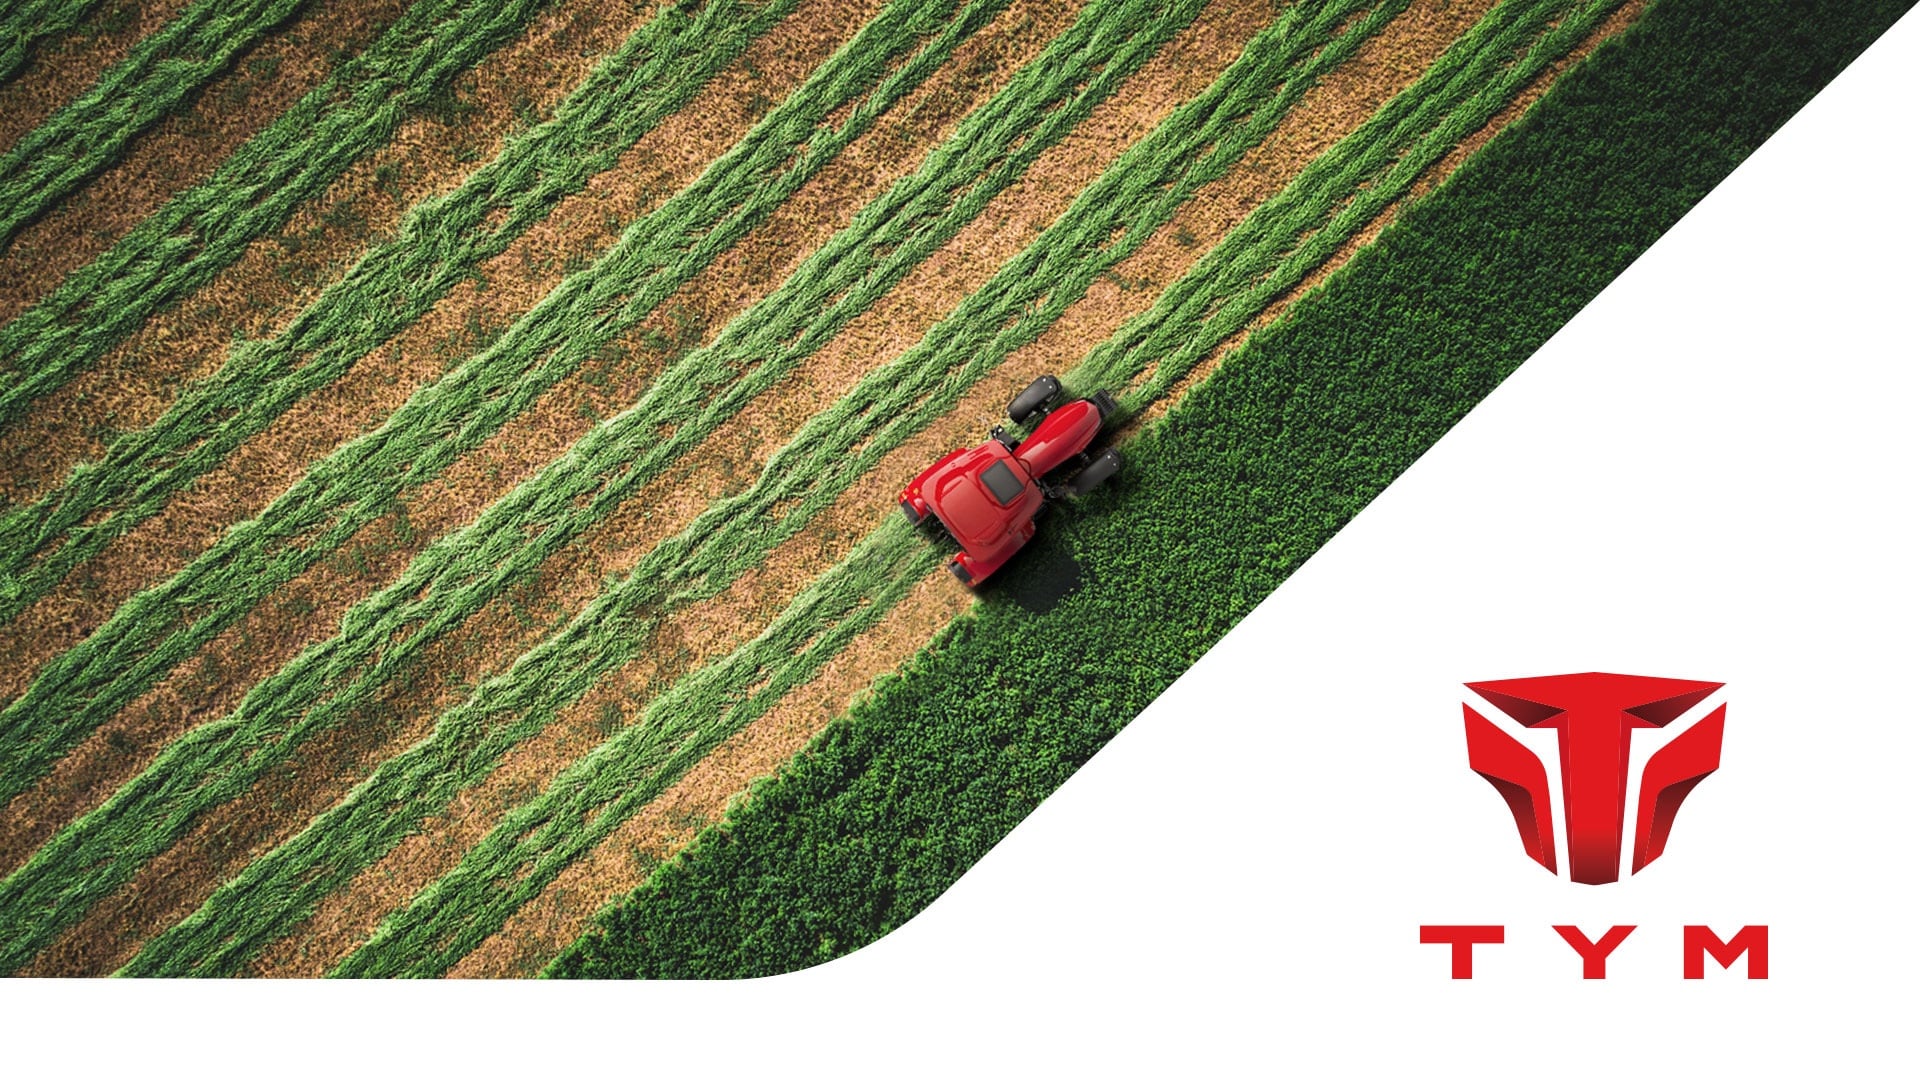 A red TYM tractor on a green field and the new logo developed for the TYM brand.